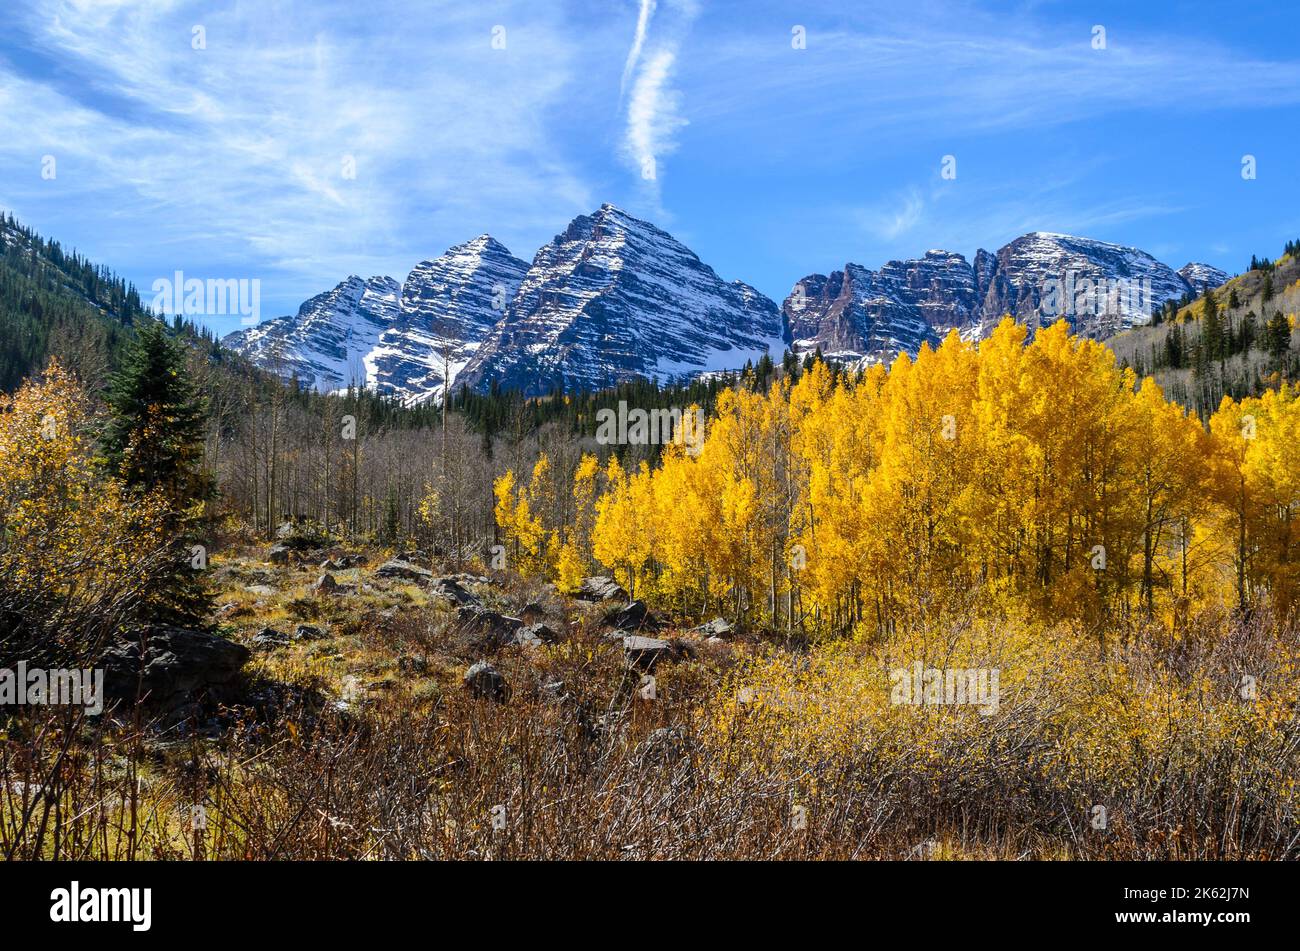 Fall Foliage in front of the Maroon Bells in Aspen, CO Stock Photo - Alamy